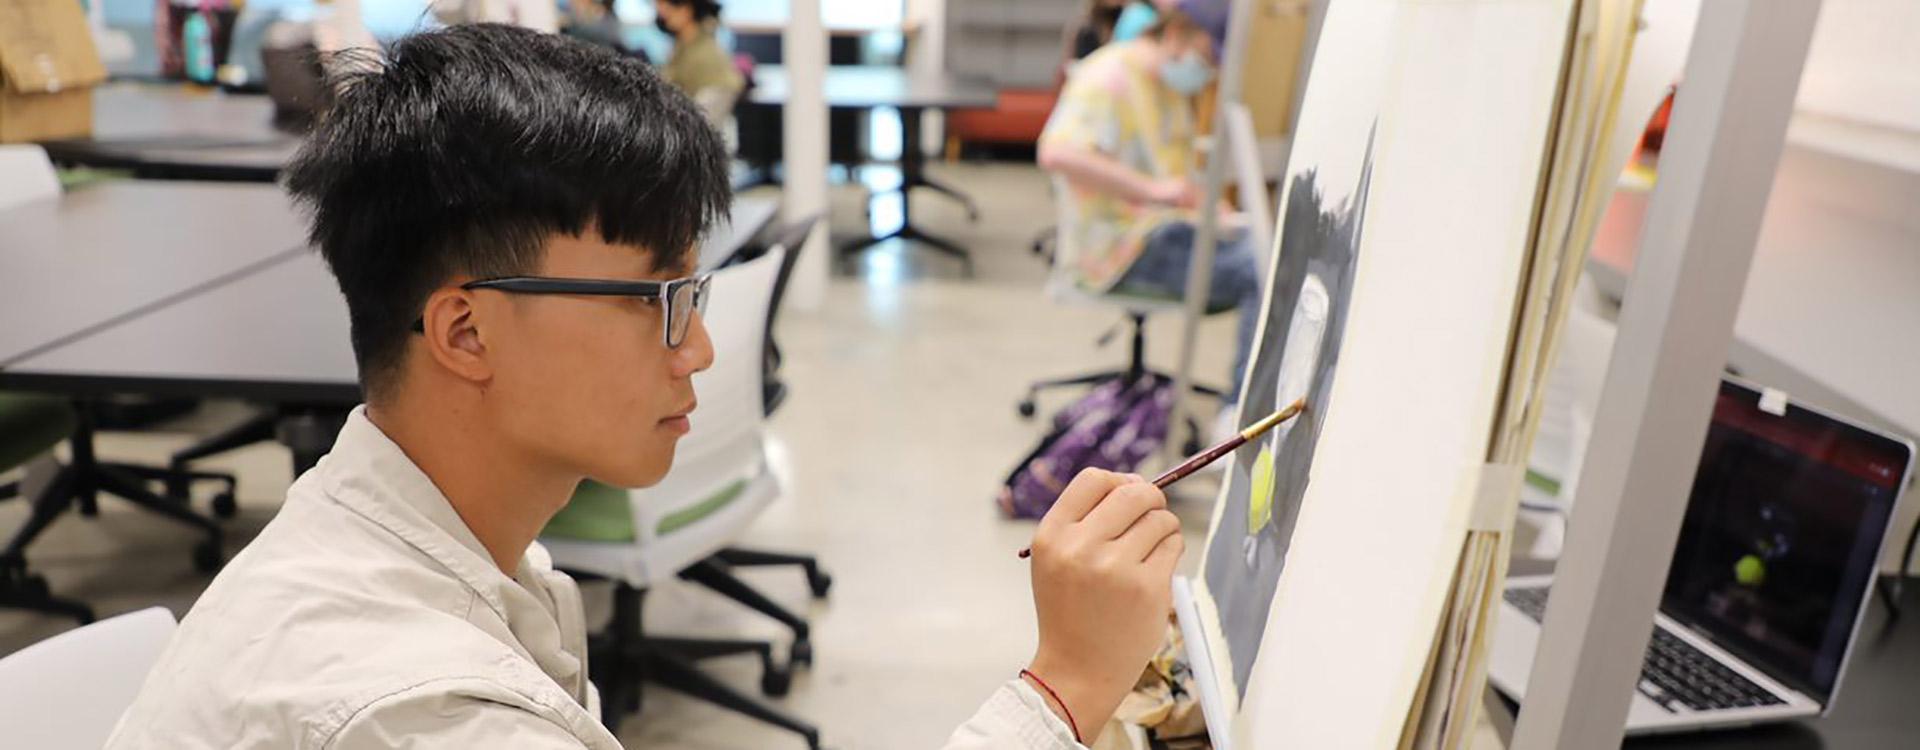 student painting artwork on an easel in fine arts class